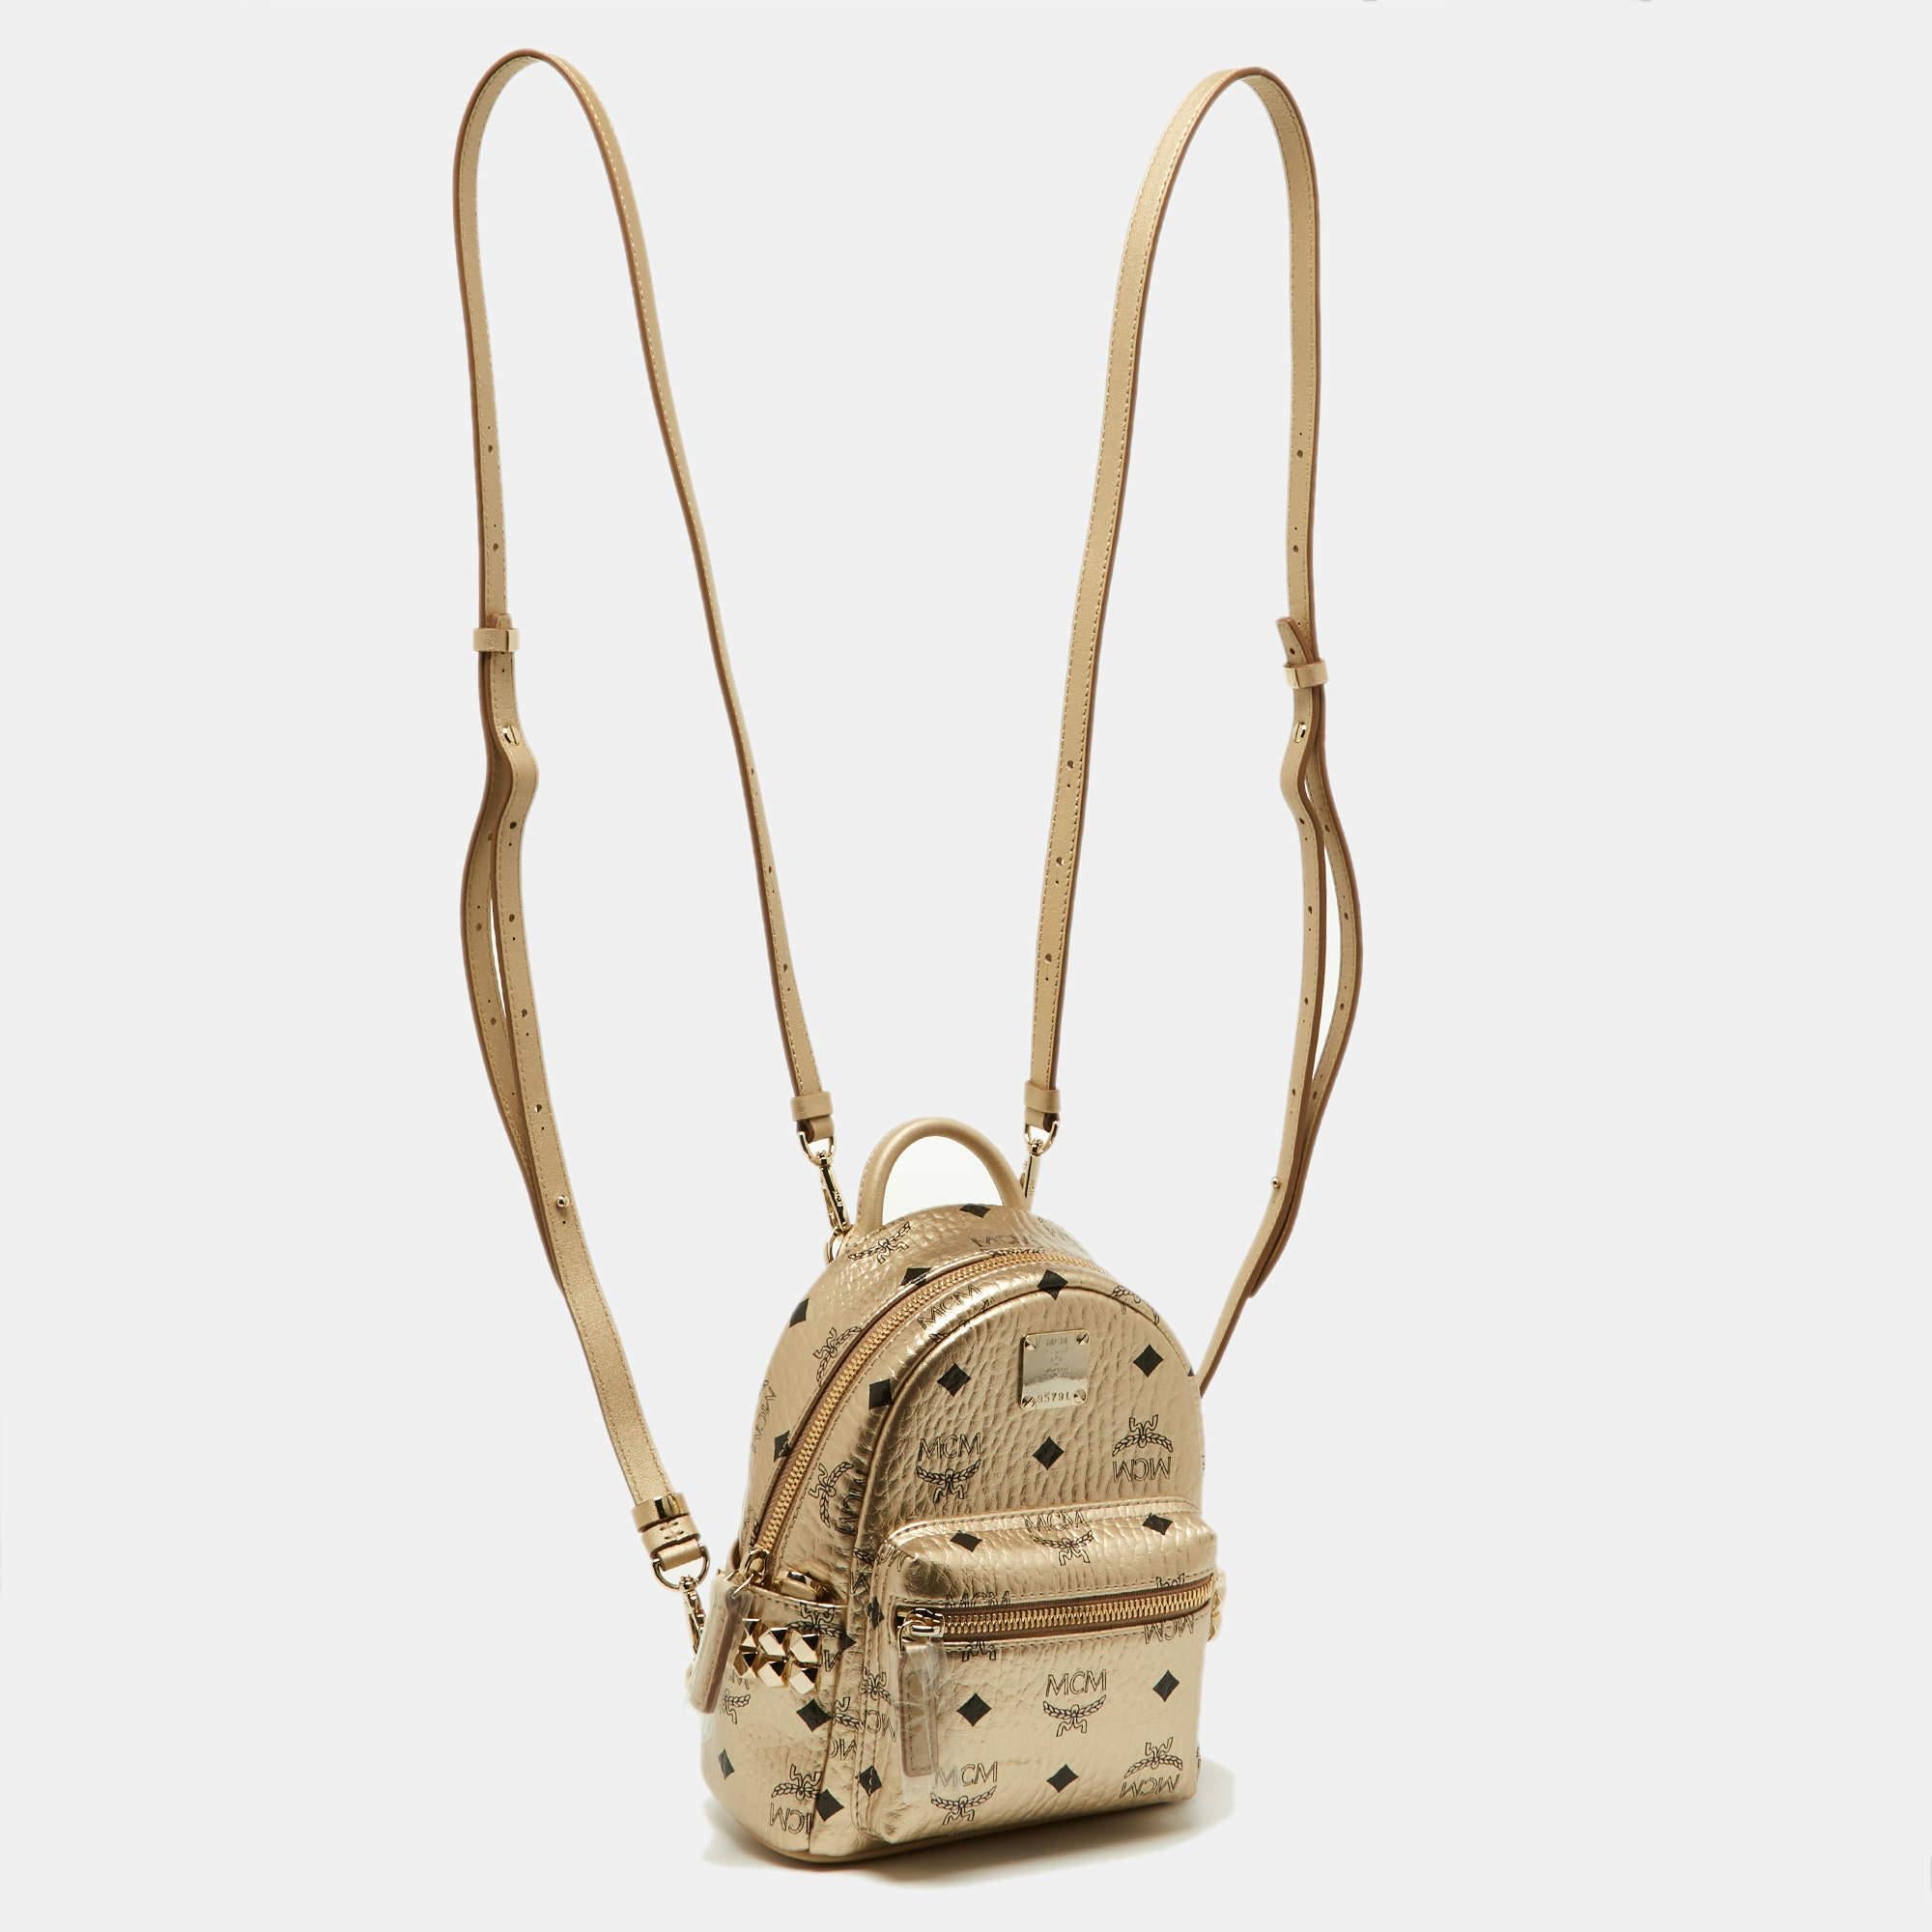 This MCM Stark-Bebe Boo backpack will come in handy for daily use or as a style statement. It is crafted from Visetos-coated canvas and leather and designed with gold-tone metal. It features a front zip pocket and two slip pockets on the sides.

